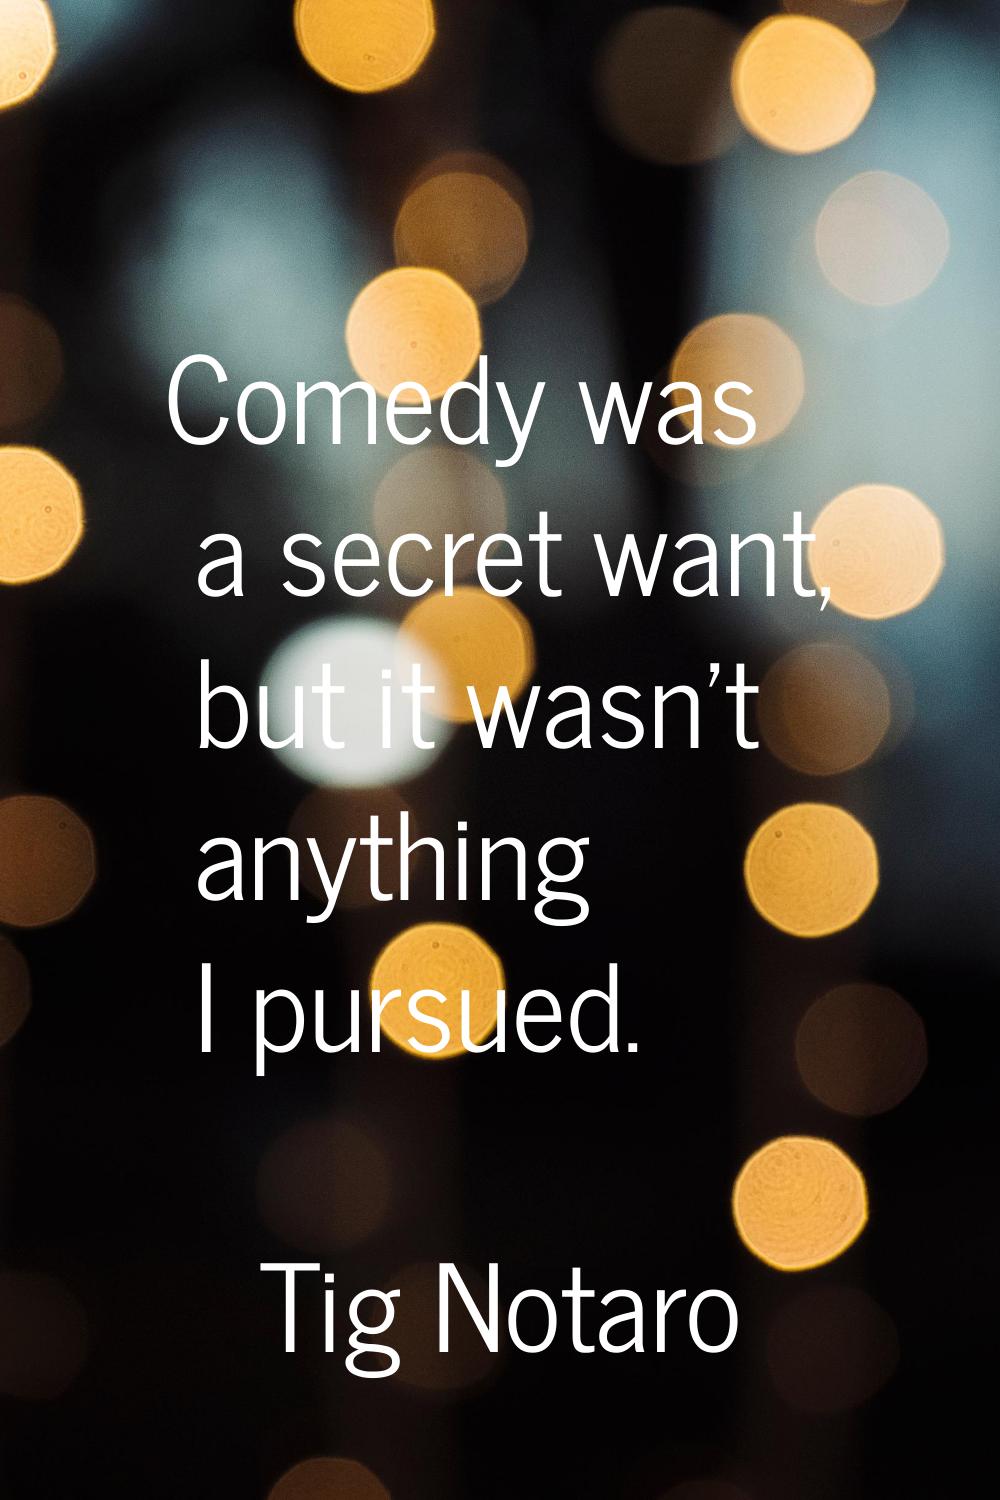 Comedy was a secret want, but it wasn't anything I pursued.